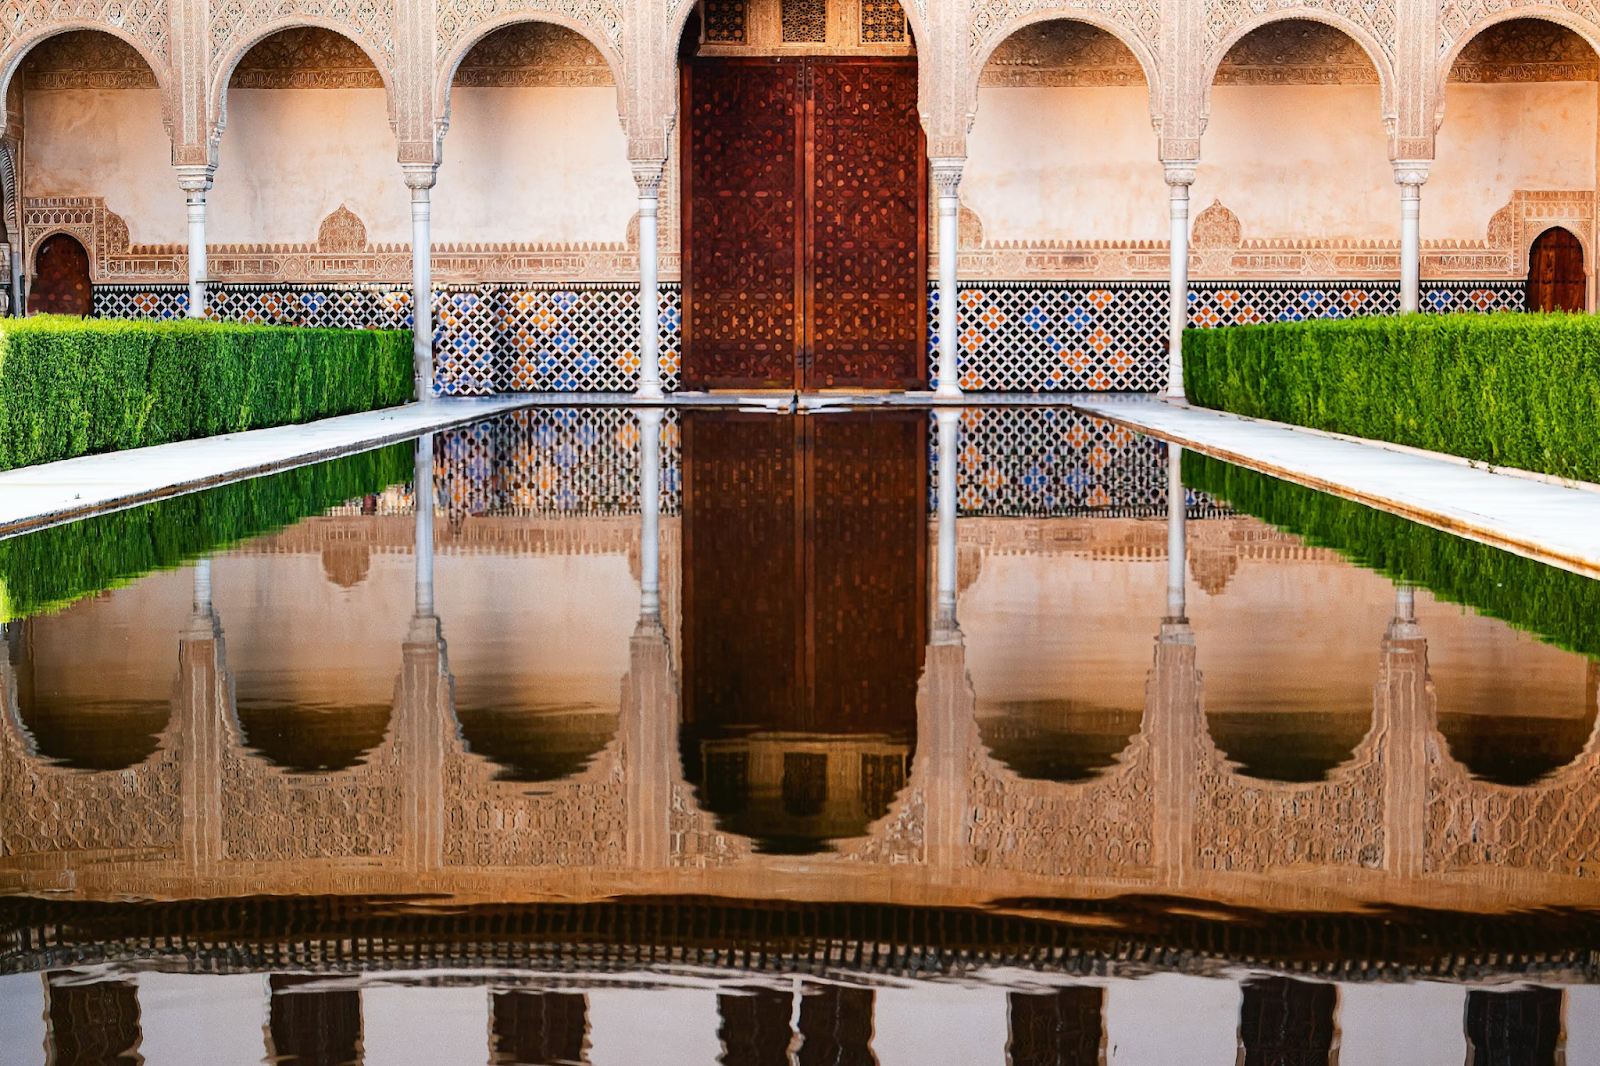 The Alhambra Palace in Granada, just a couple hours by train from Malaga